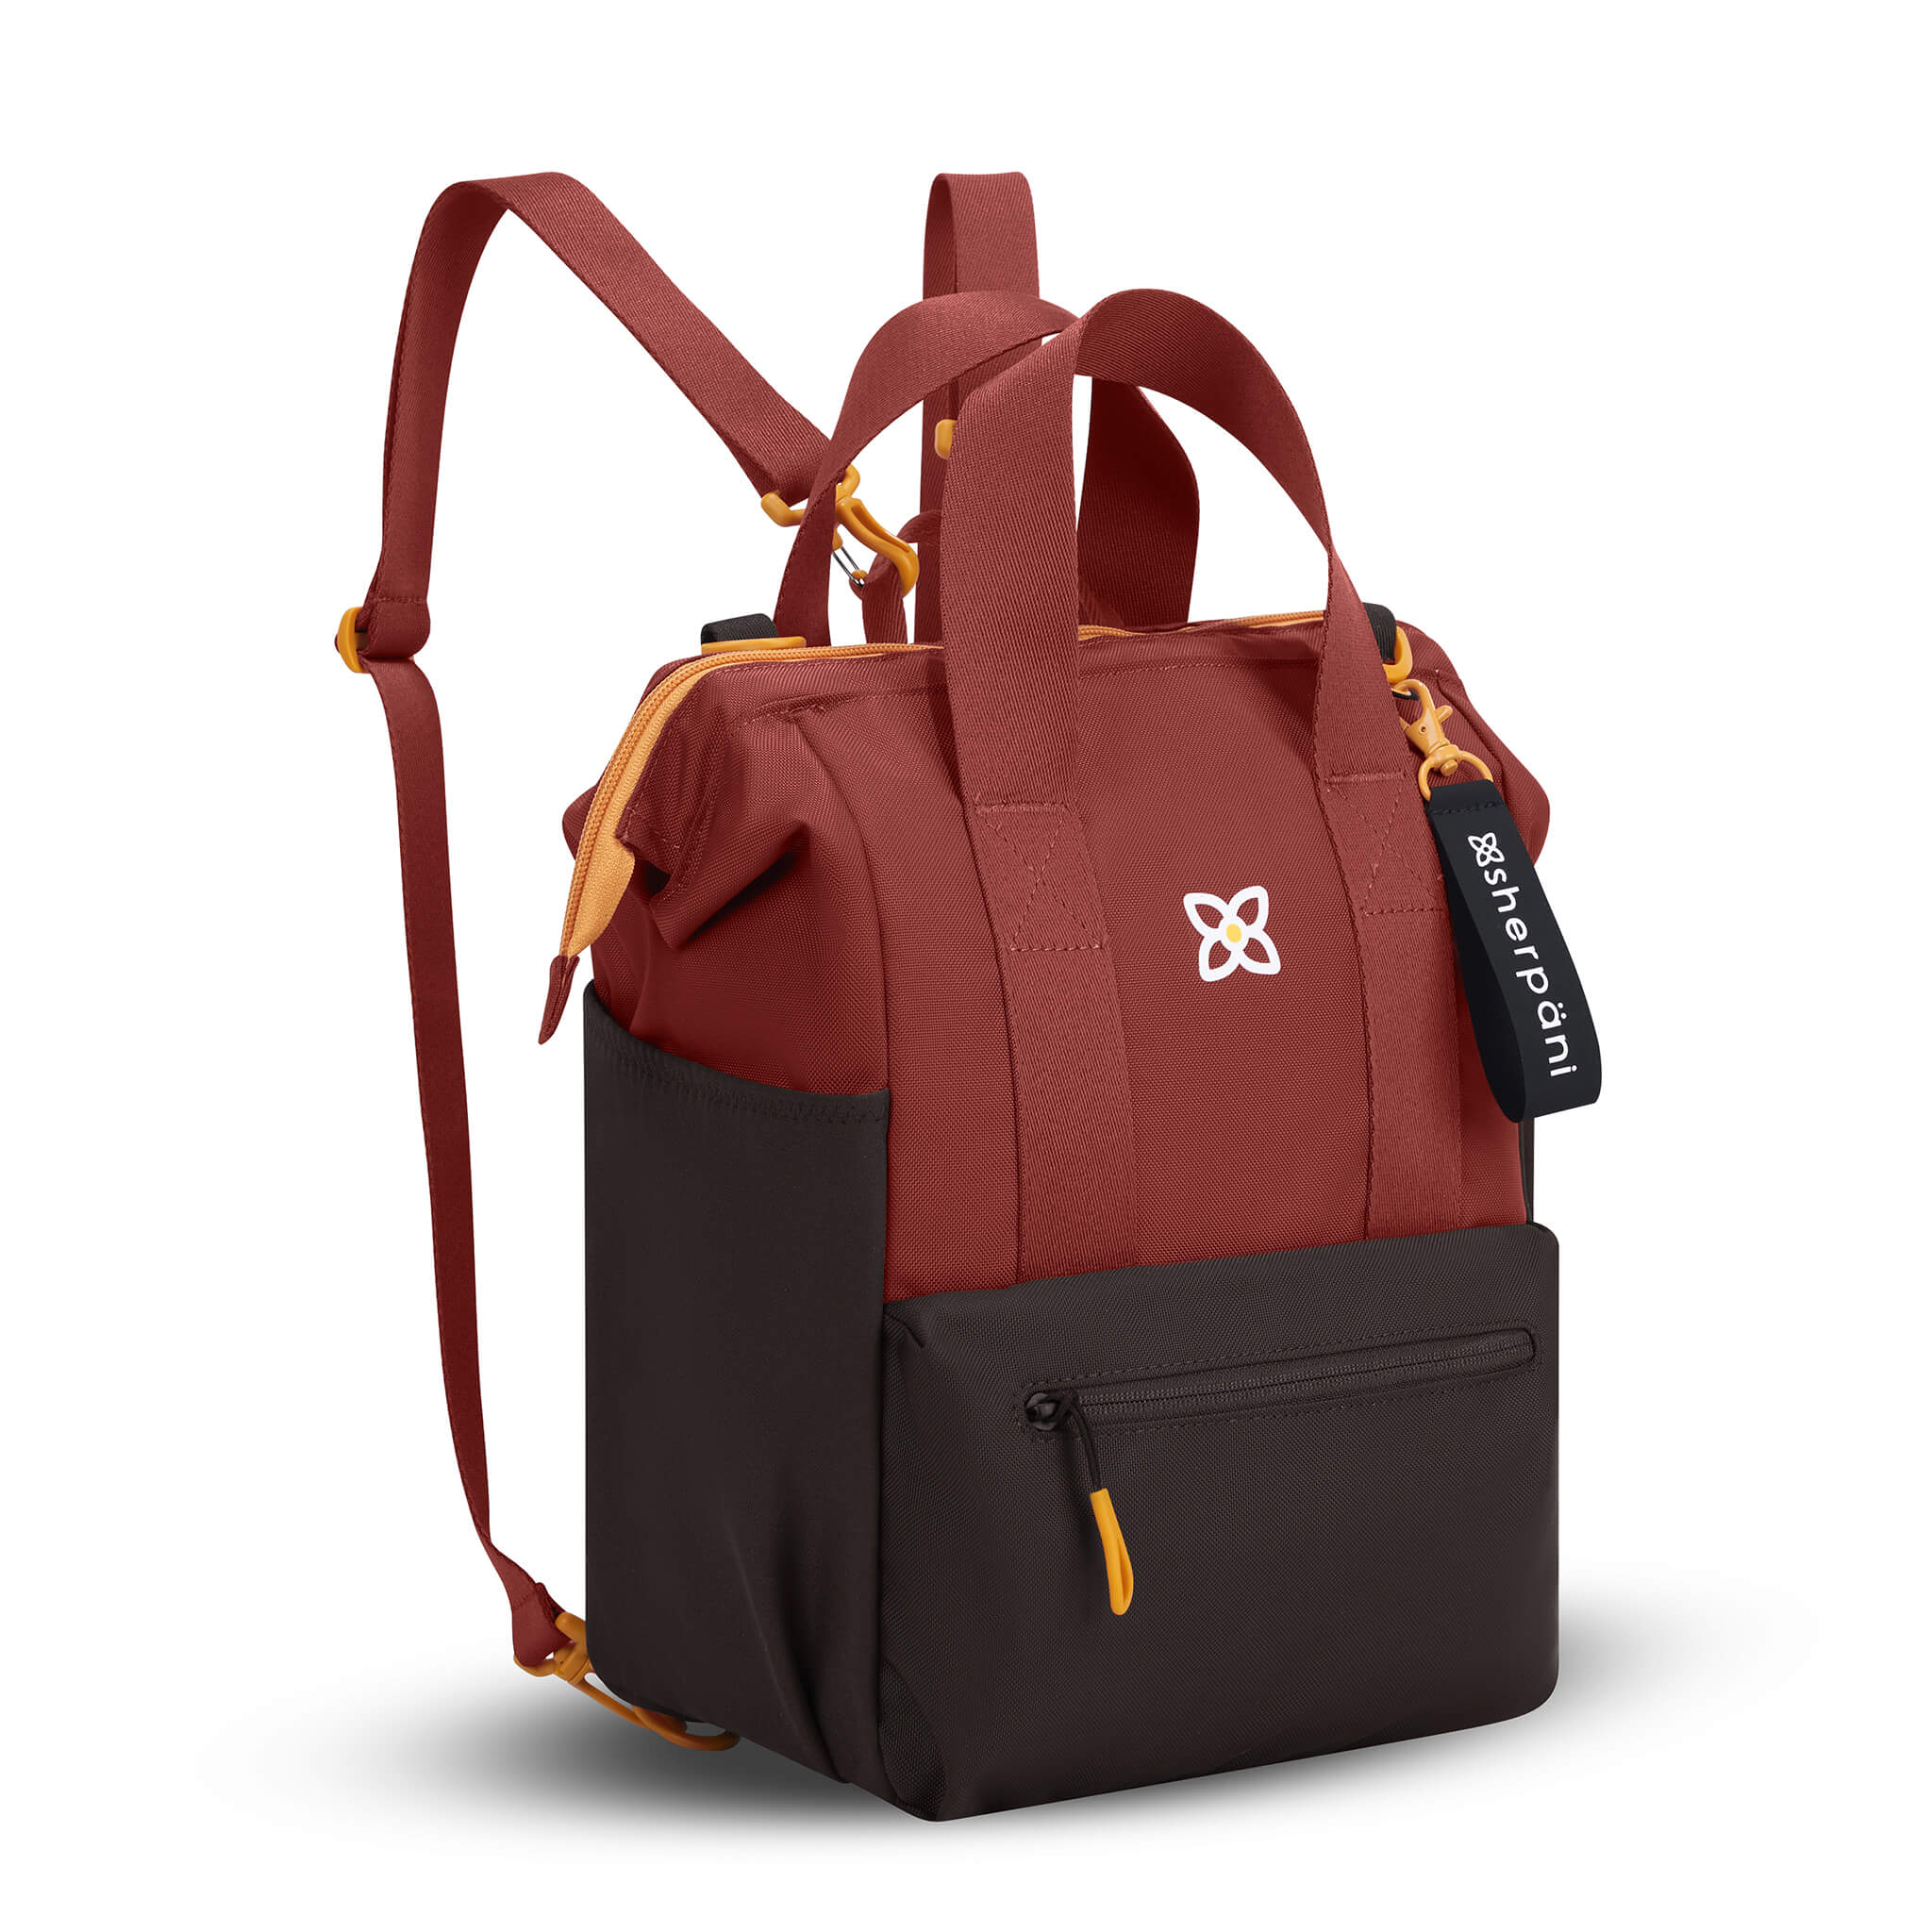 Angled front view of Sherpani convertible travel bag, the Dispatch in Cider. Dispatch features include external zipper pocket, three water bottle holders, fixed tote handles, removable straps, detachable straps, adjustable straps, padded laptop sleeve and a doctor bag opening. The Cider color is two-toned in burgundy and dark brown with accents in yellow. #color_cider